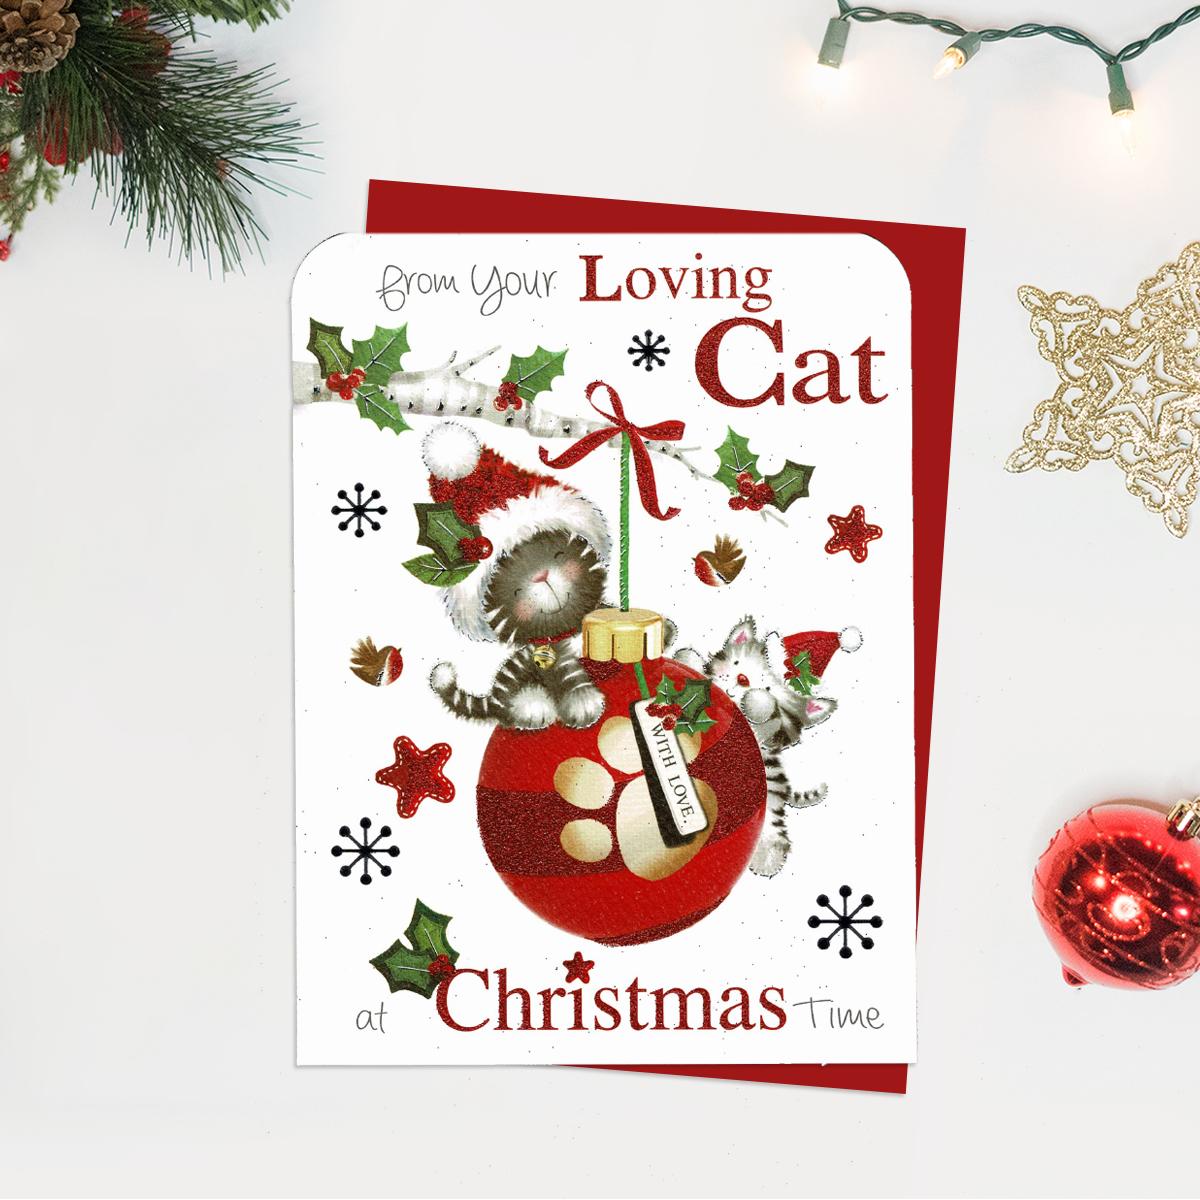 From Your Loving Cat Shows Two Cats On A Giant Bauble. Finished With Red Glitter And Envelope